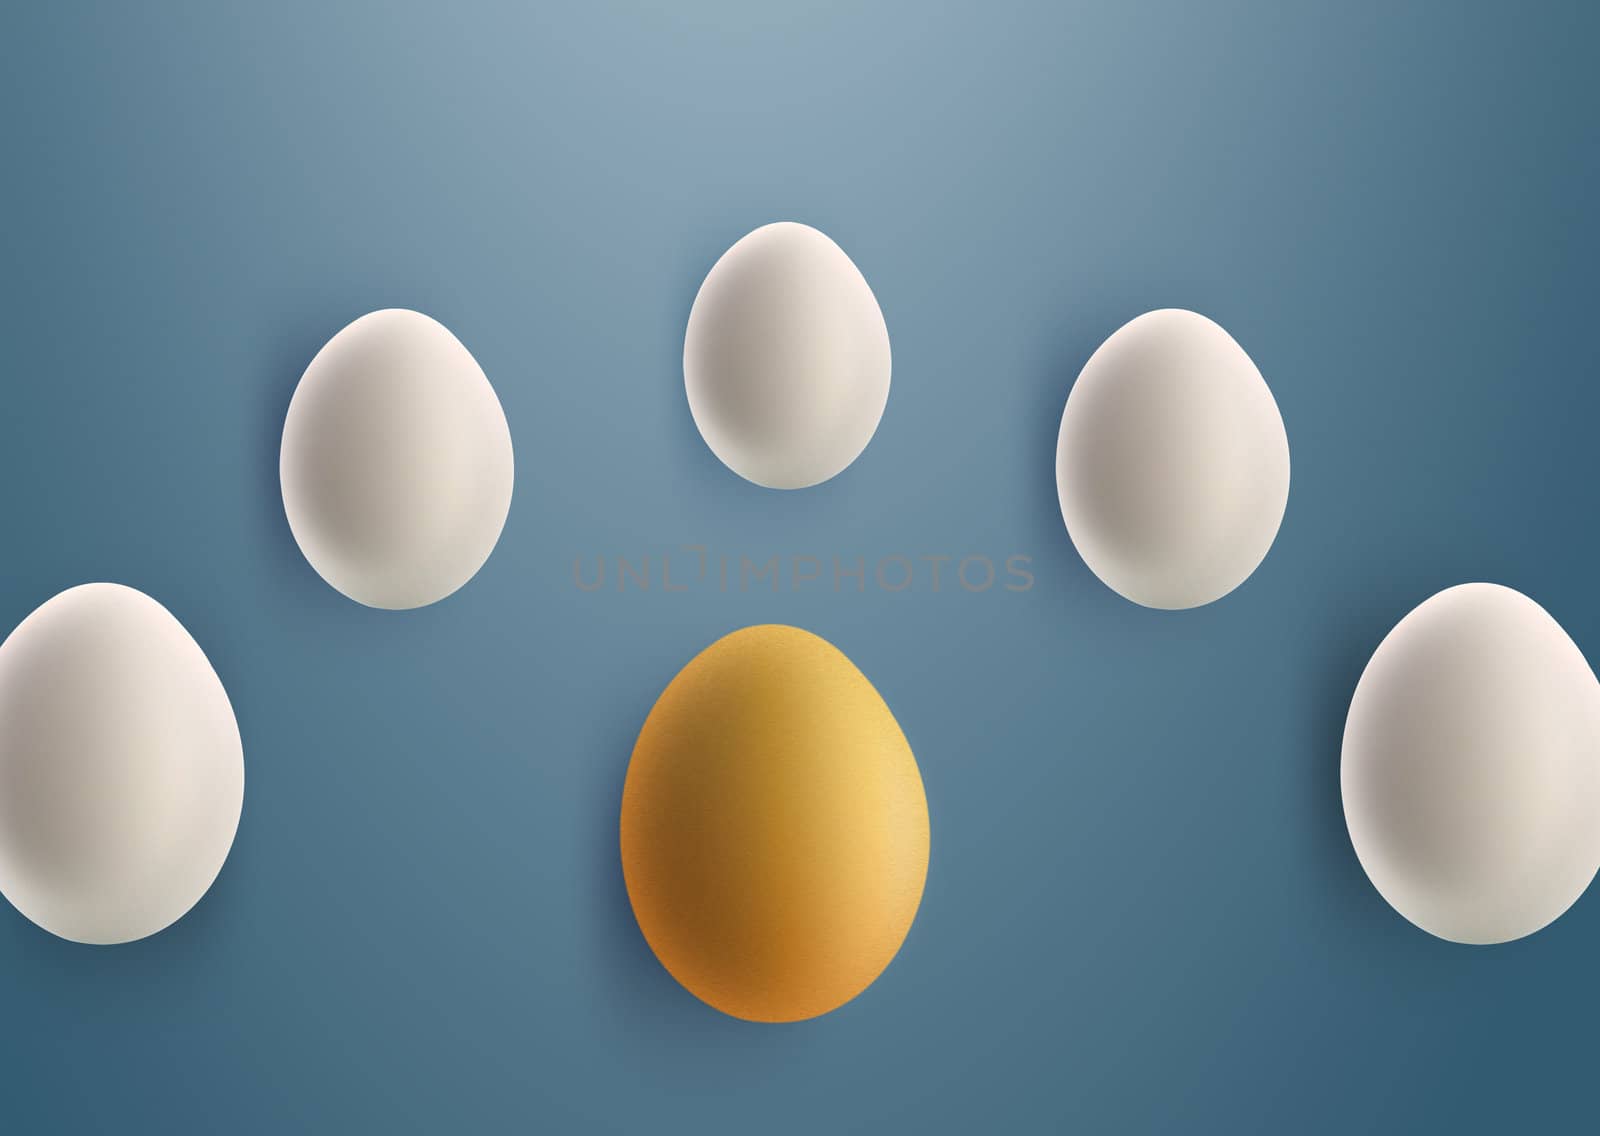 unique golden egg between white eggs on blue background.